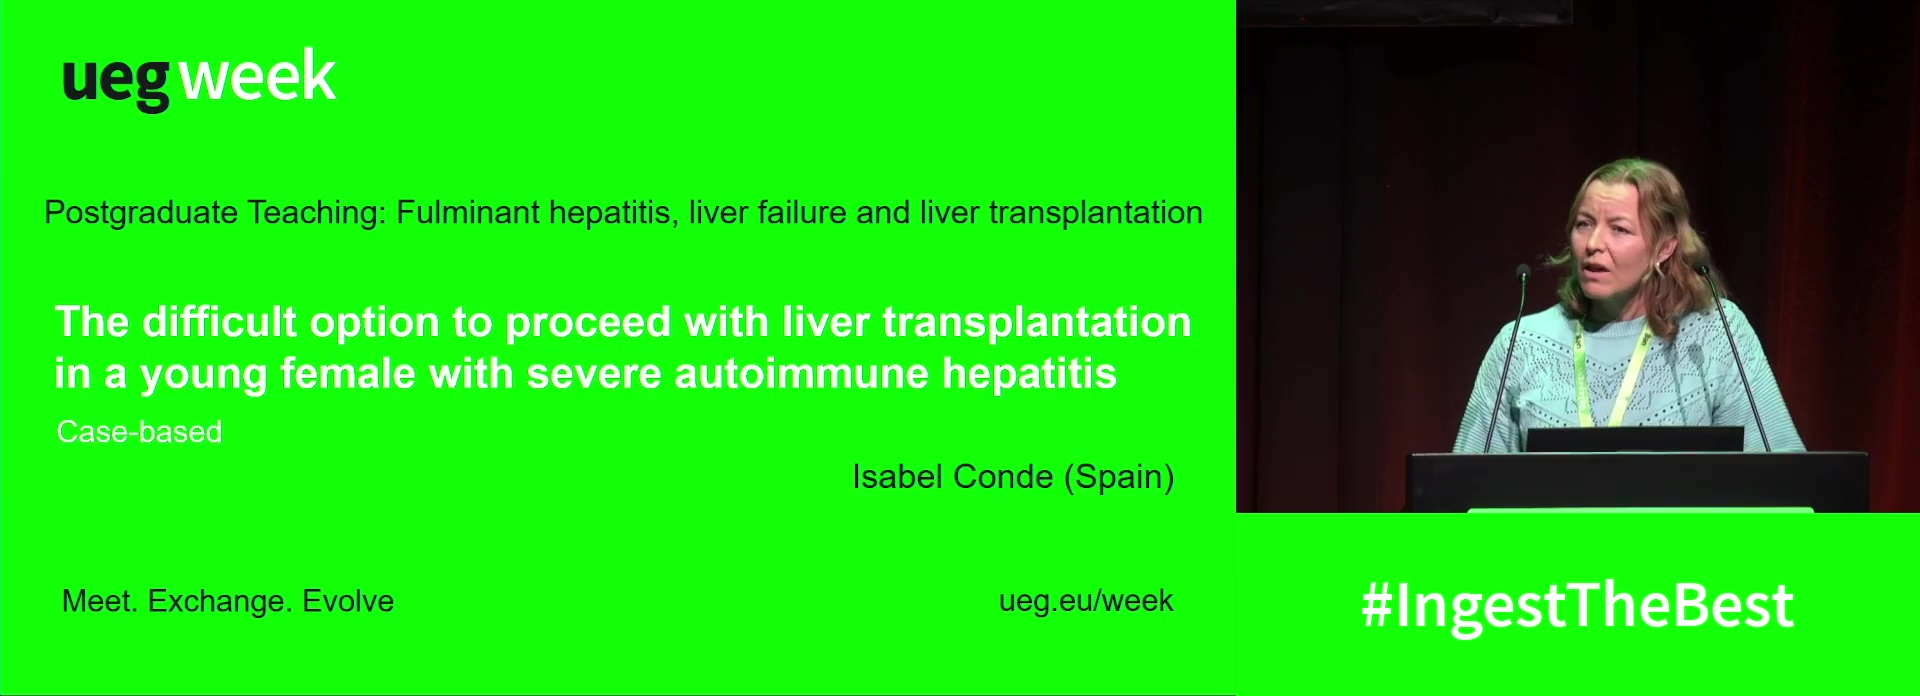 The difficult option to proceed with liver transplantation in a young female with severe autoimmune hepatitis